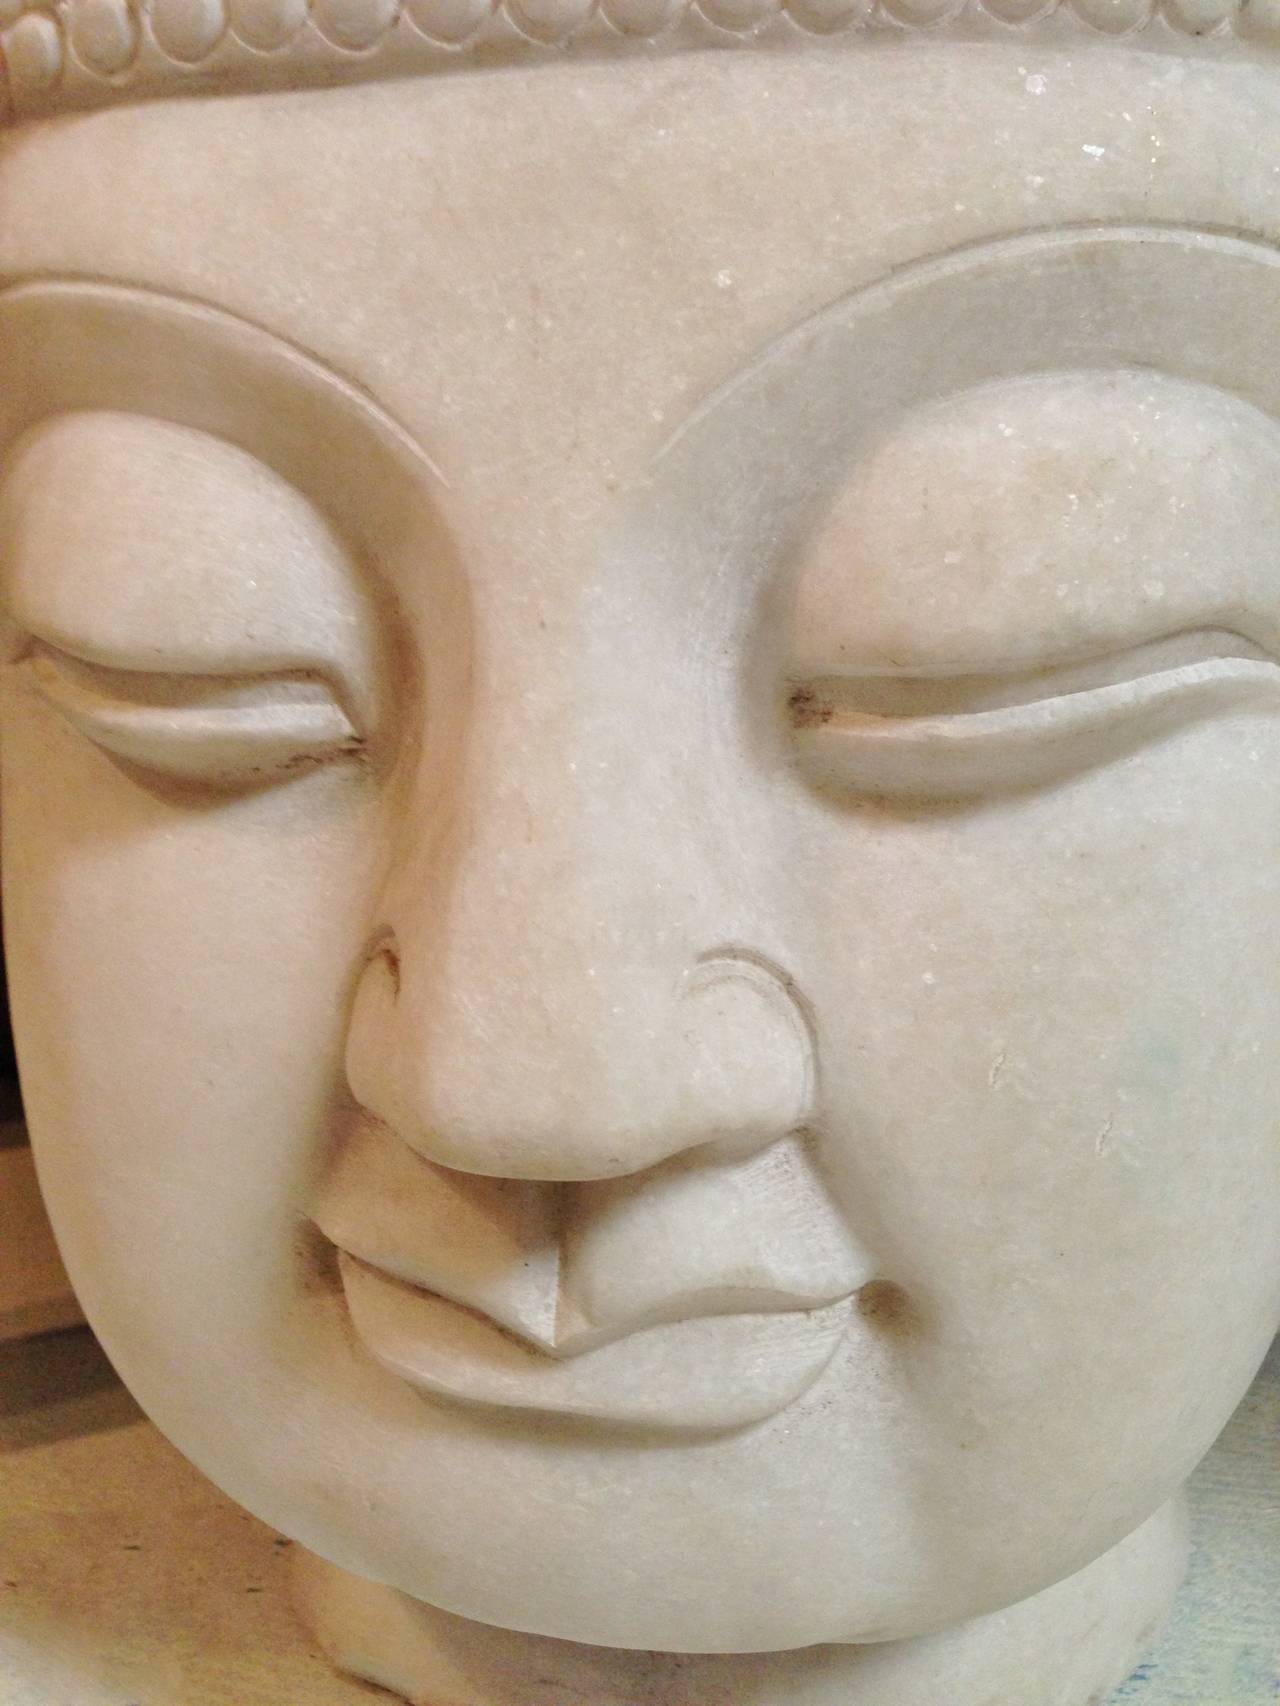 The style of this Buddha is traditional Chinese. In other words, this is the look of Buddha in most Buddhist temples in China. The expression is straightforward with little to non fussy decorations. Facial features are where the sculptor emphasizes